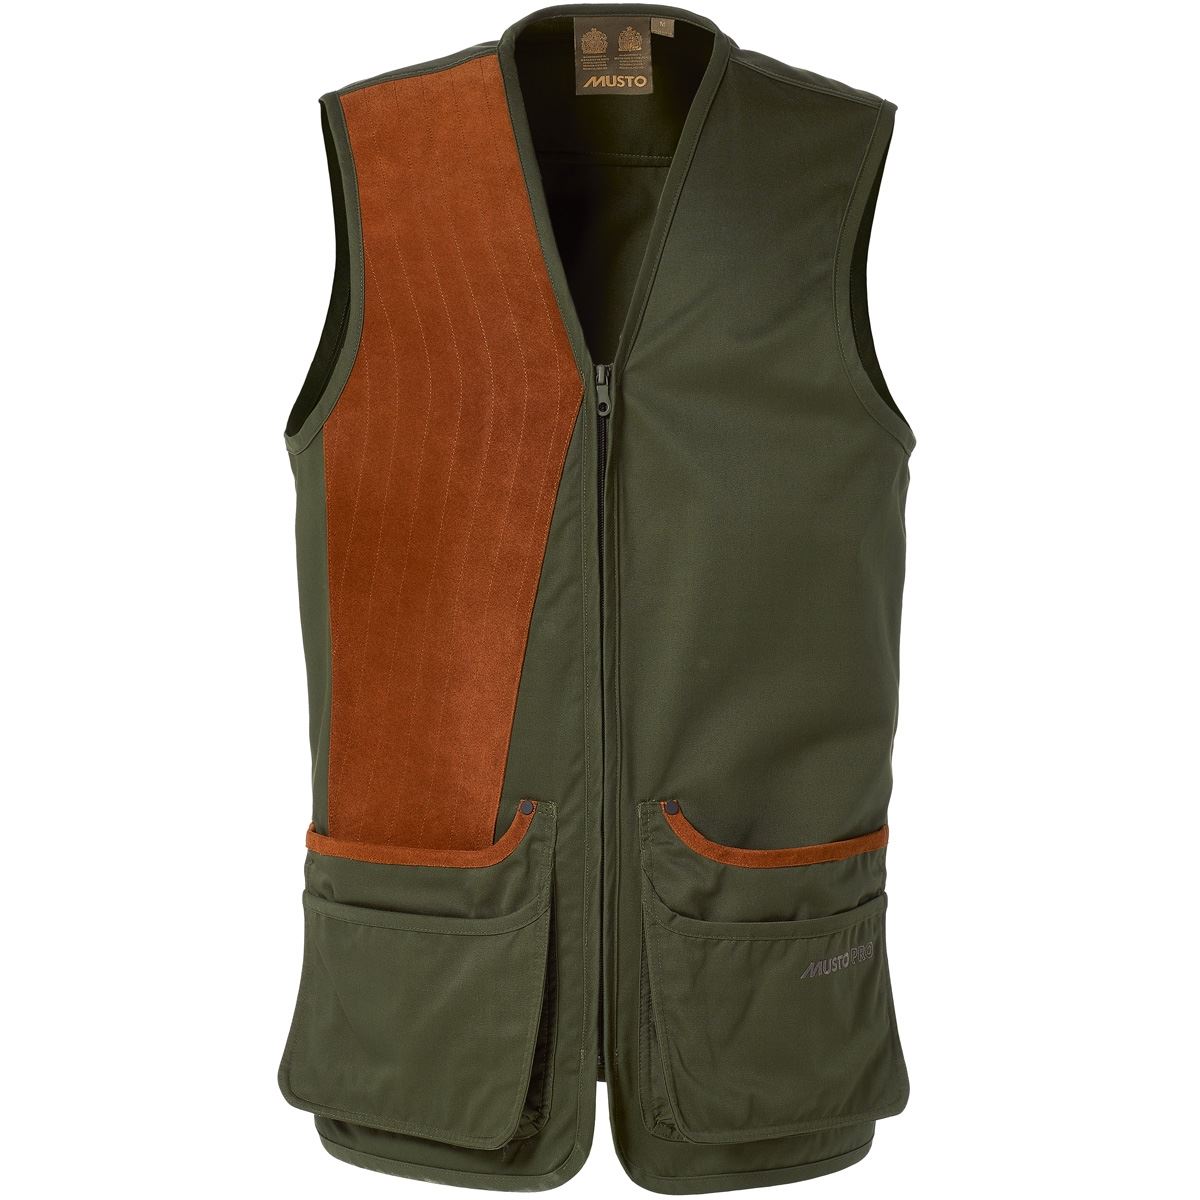 What are the materials used for trims on pockets of Musto shooting vest?